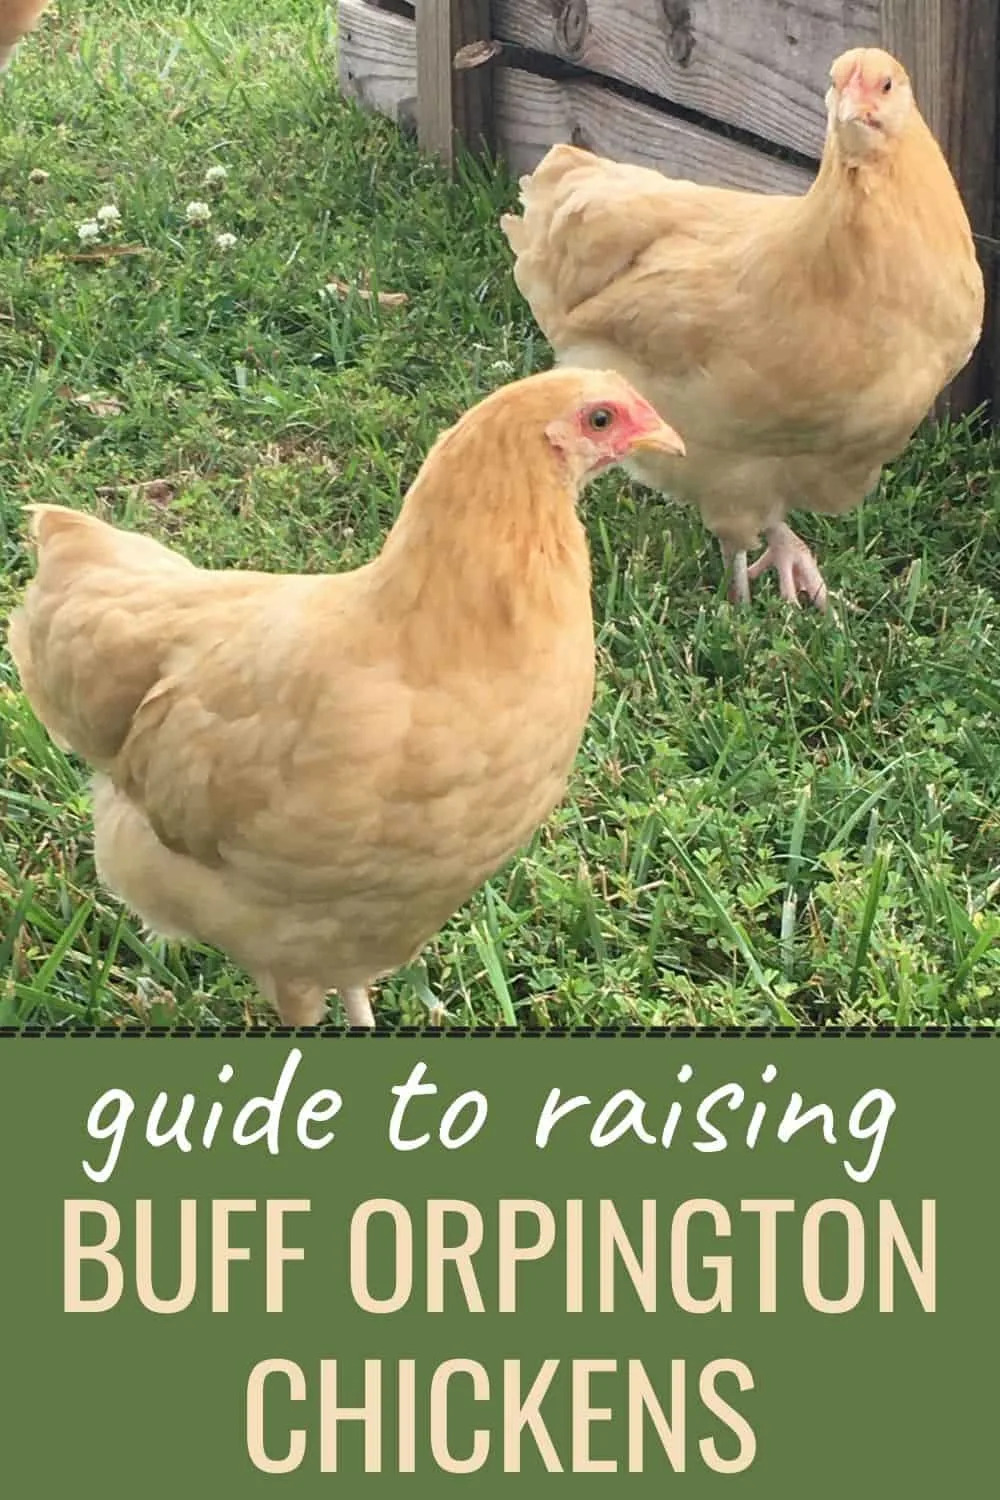 Guide to raising buff orpington chickens